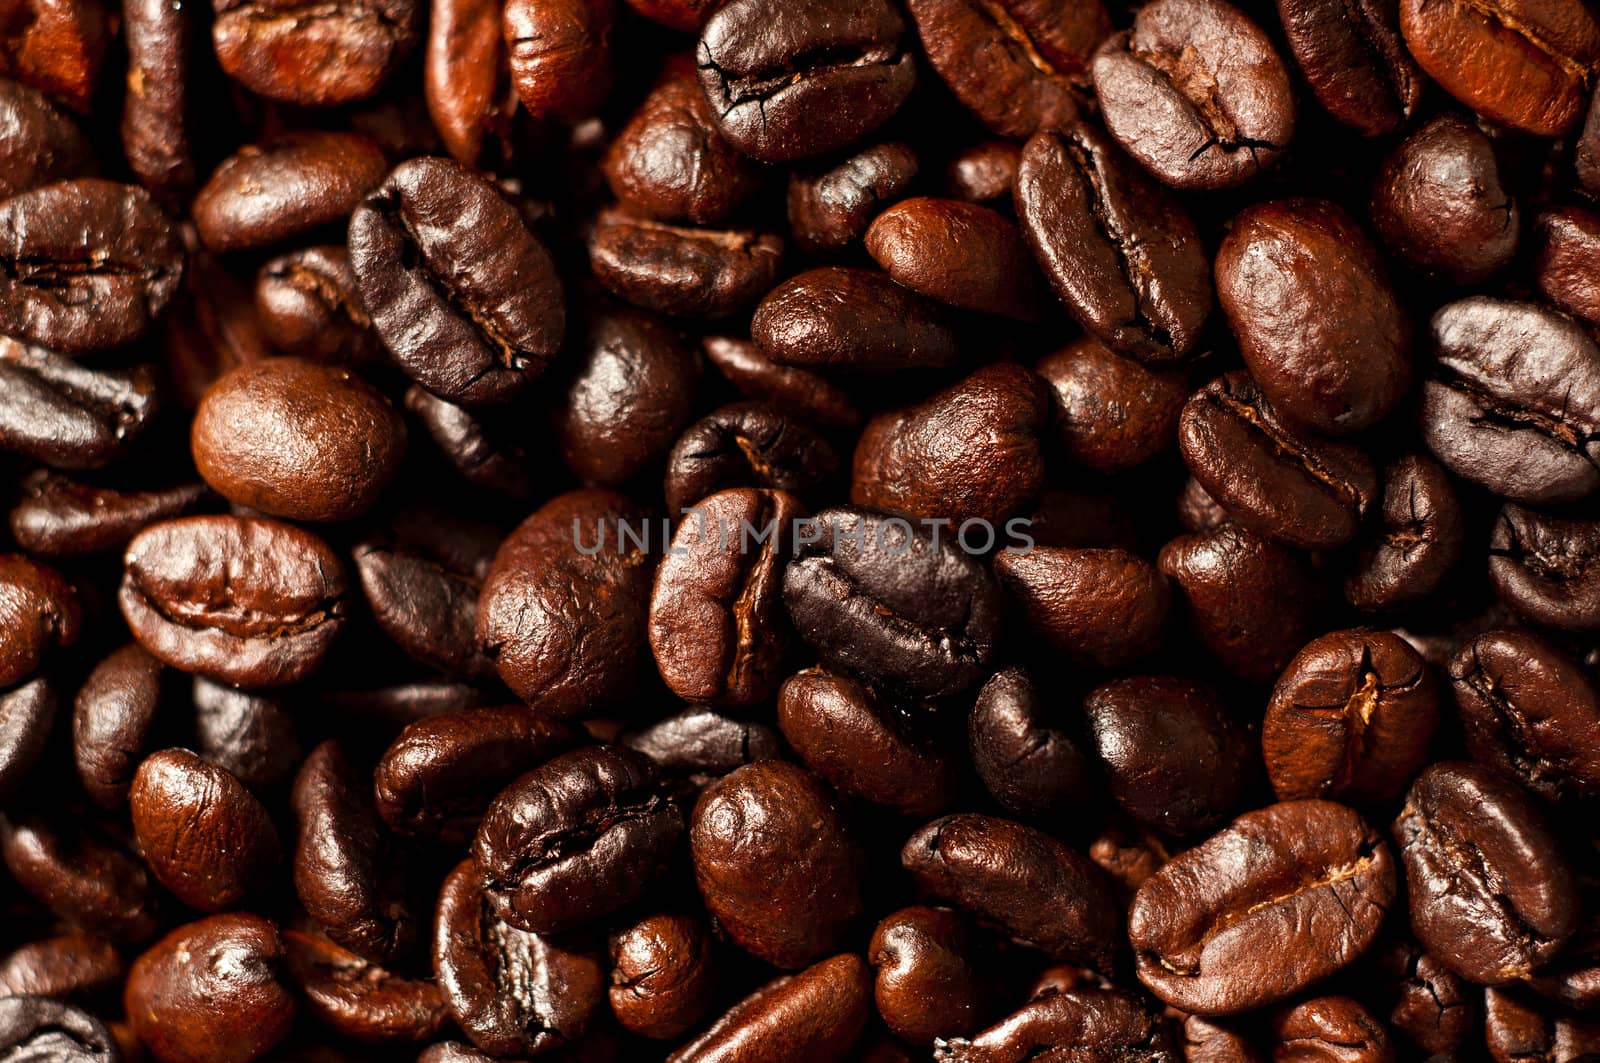 A closeup of home roasted Colombian coffee beans.